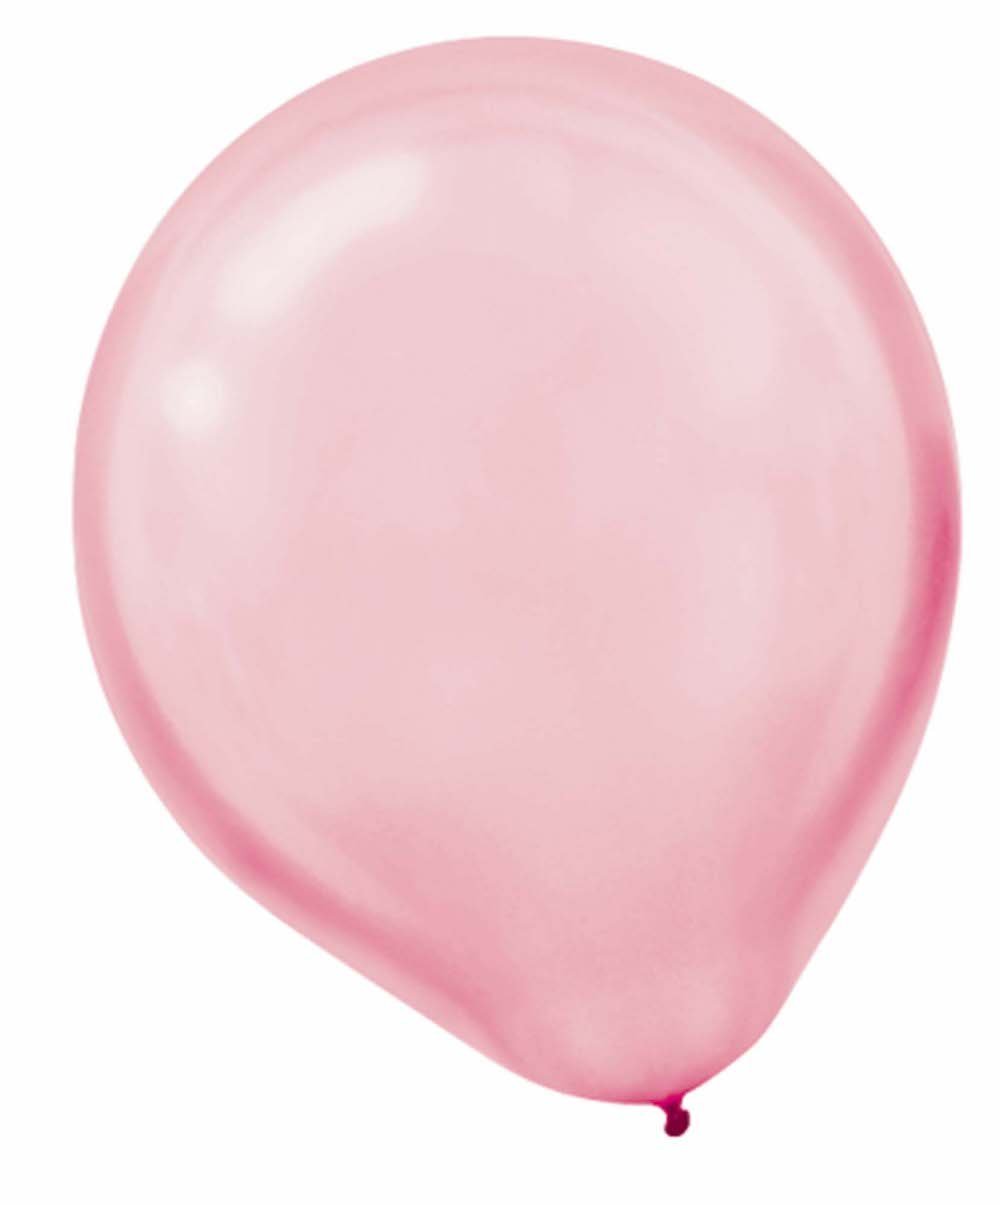 Amscan Balloons Pink Pearlized Latex Balloons 100ct